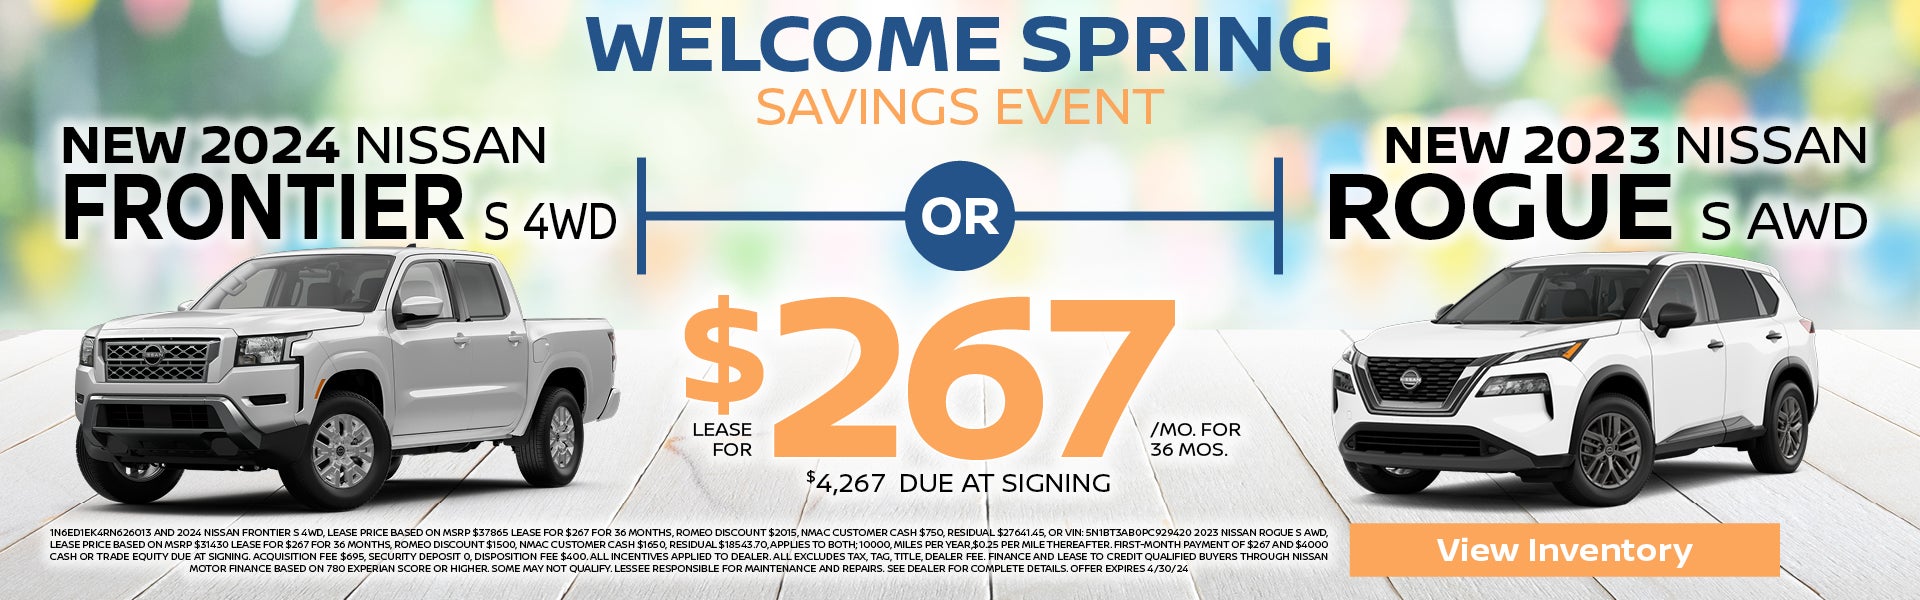 Welcome Spring Sales Event